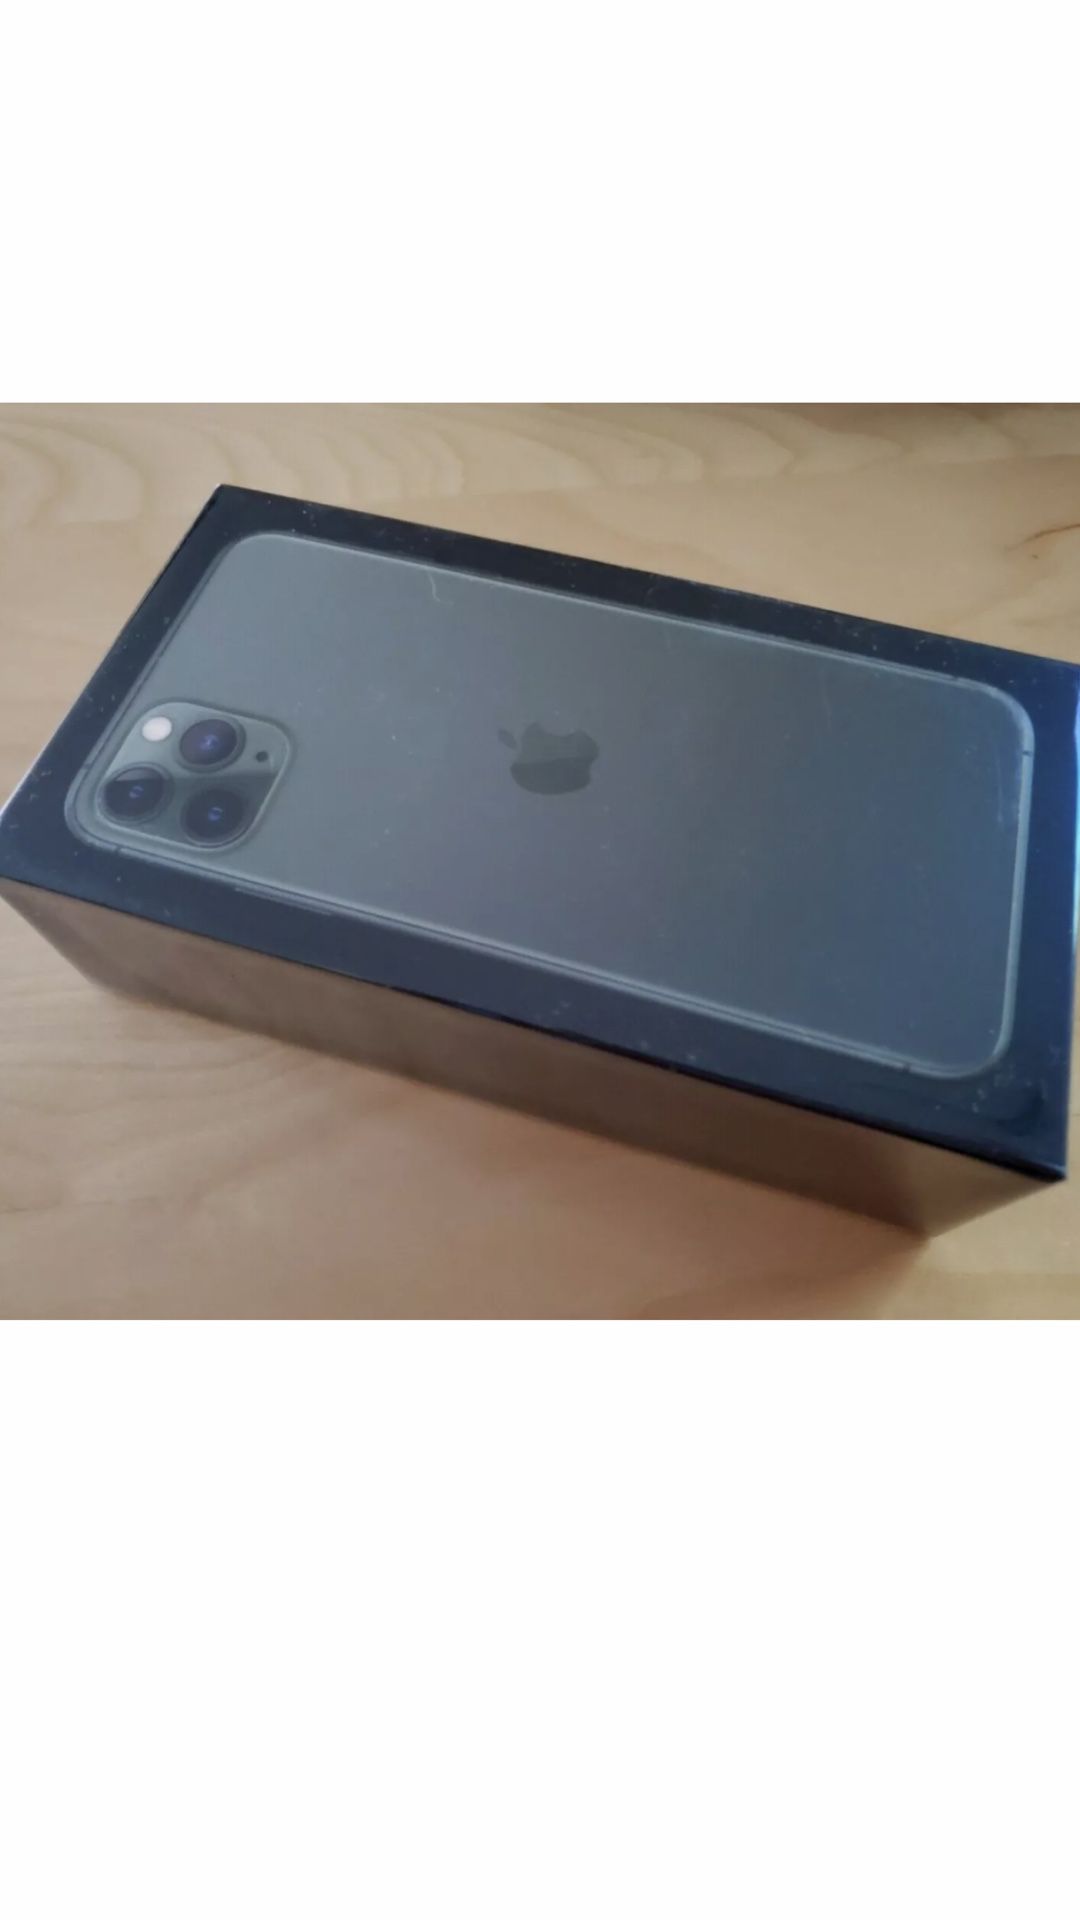 iPhone 11 Pro Max 512GB Space Gray Unlocked ($1200 FIRM CASH ONLY)